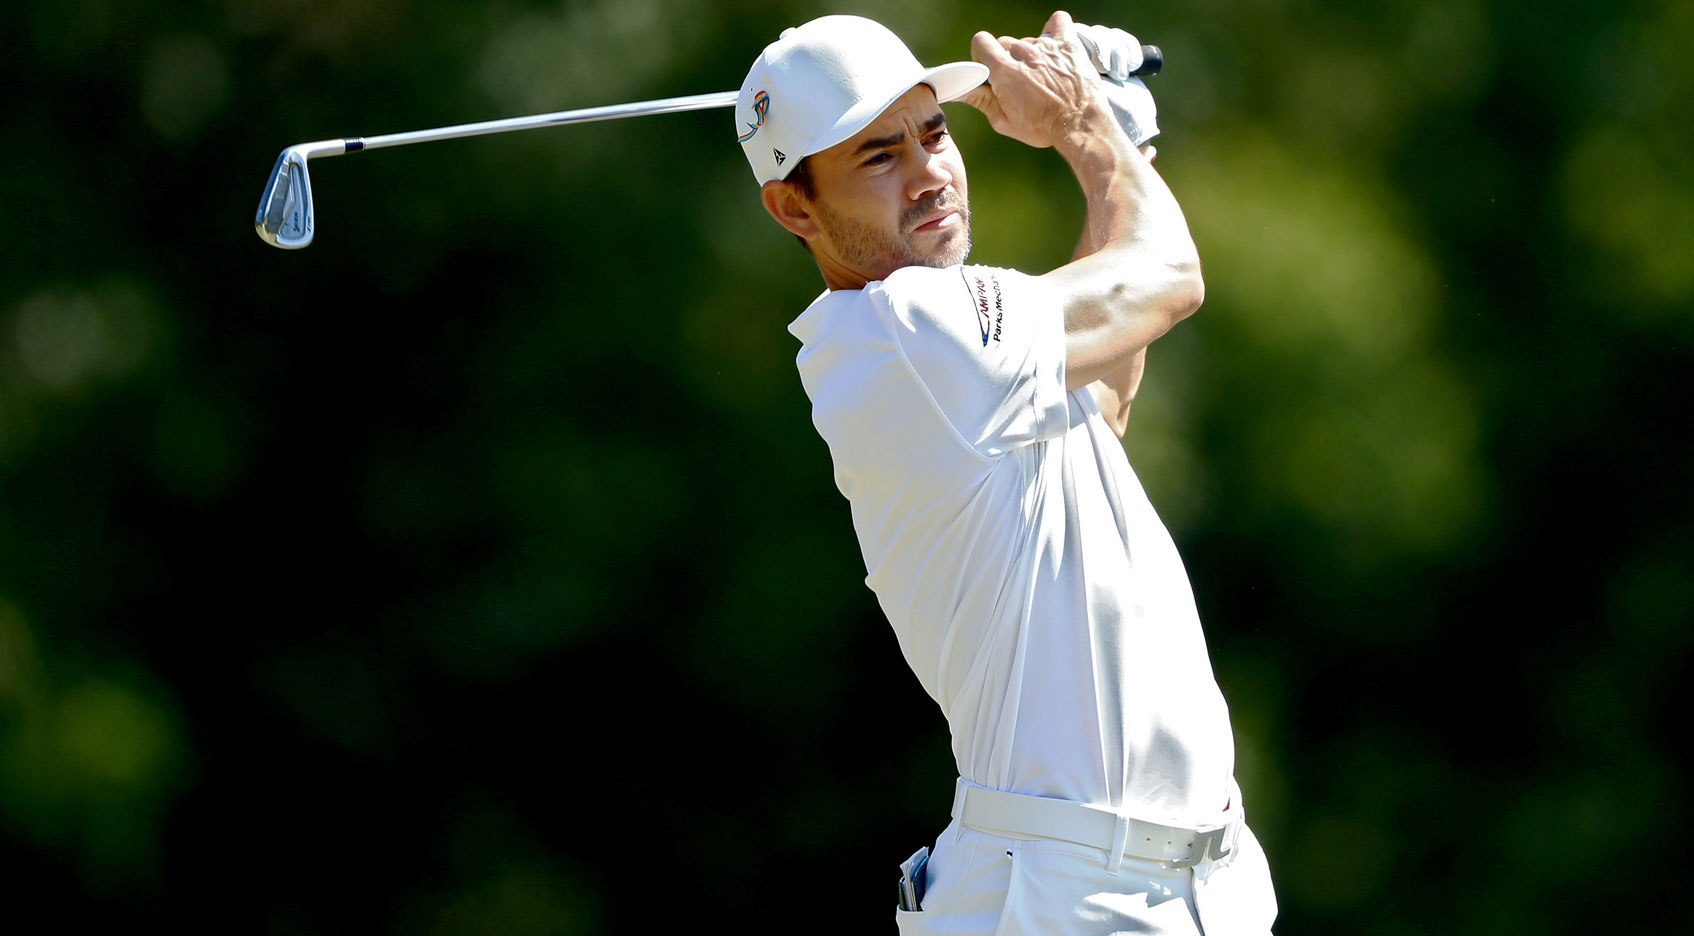 Camilo Villegas remains in contention at The RSM Classic